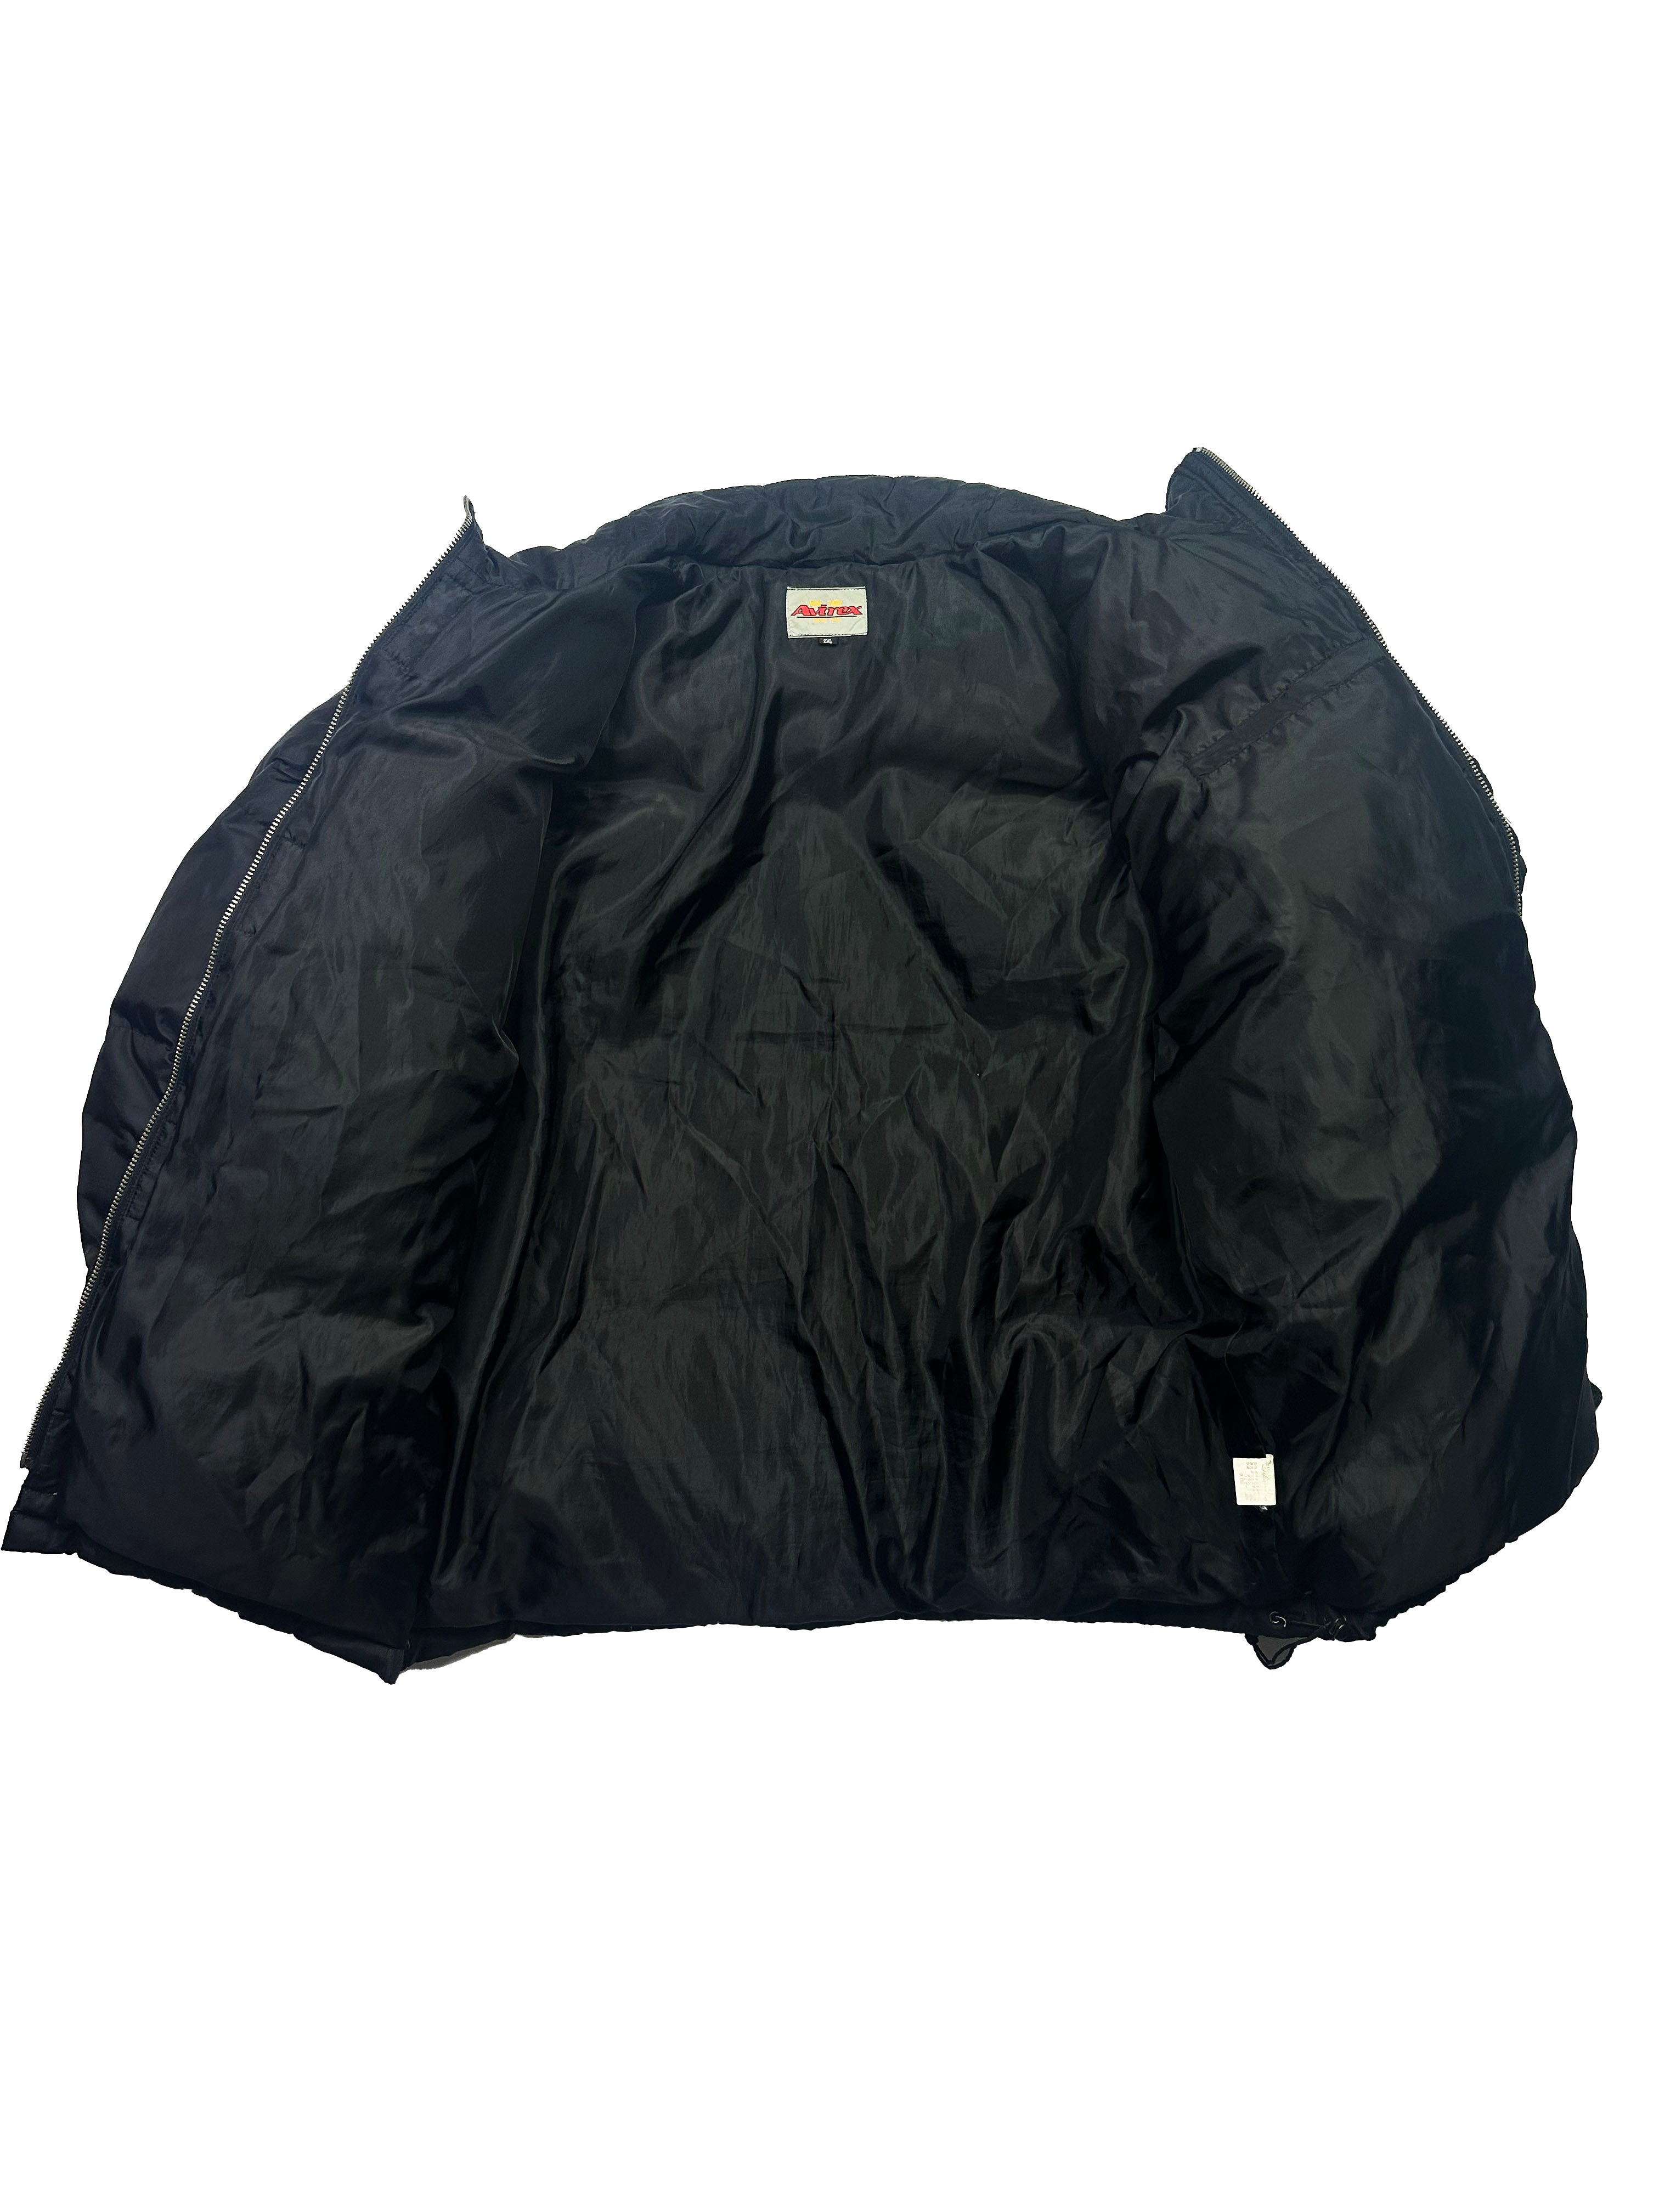 Avirex Black Spell Out Puffer Jacket 90's